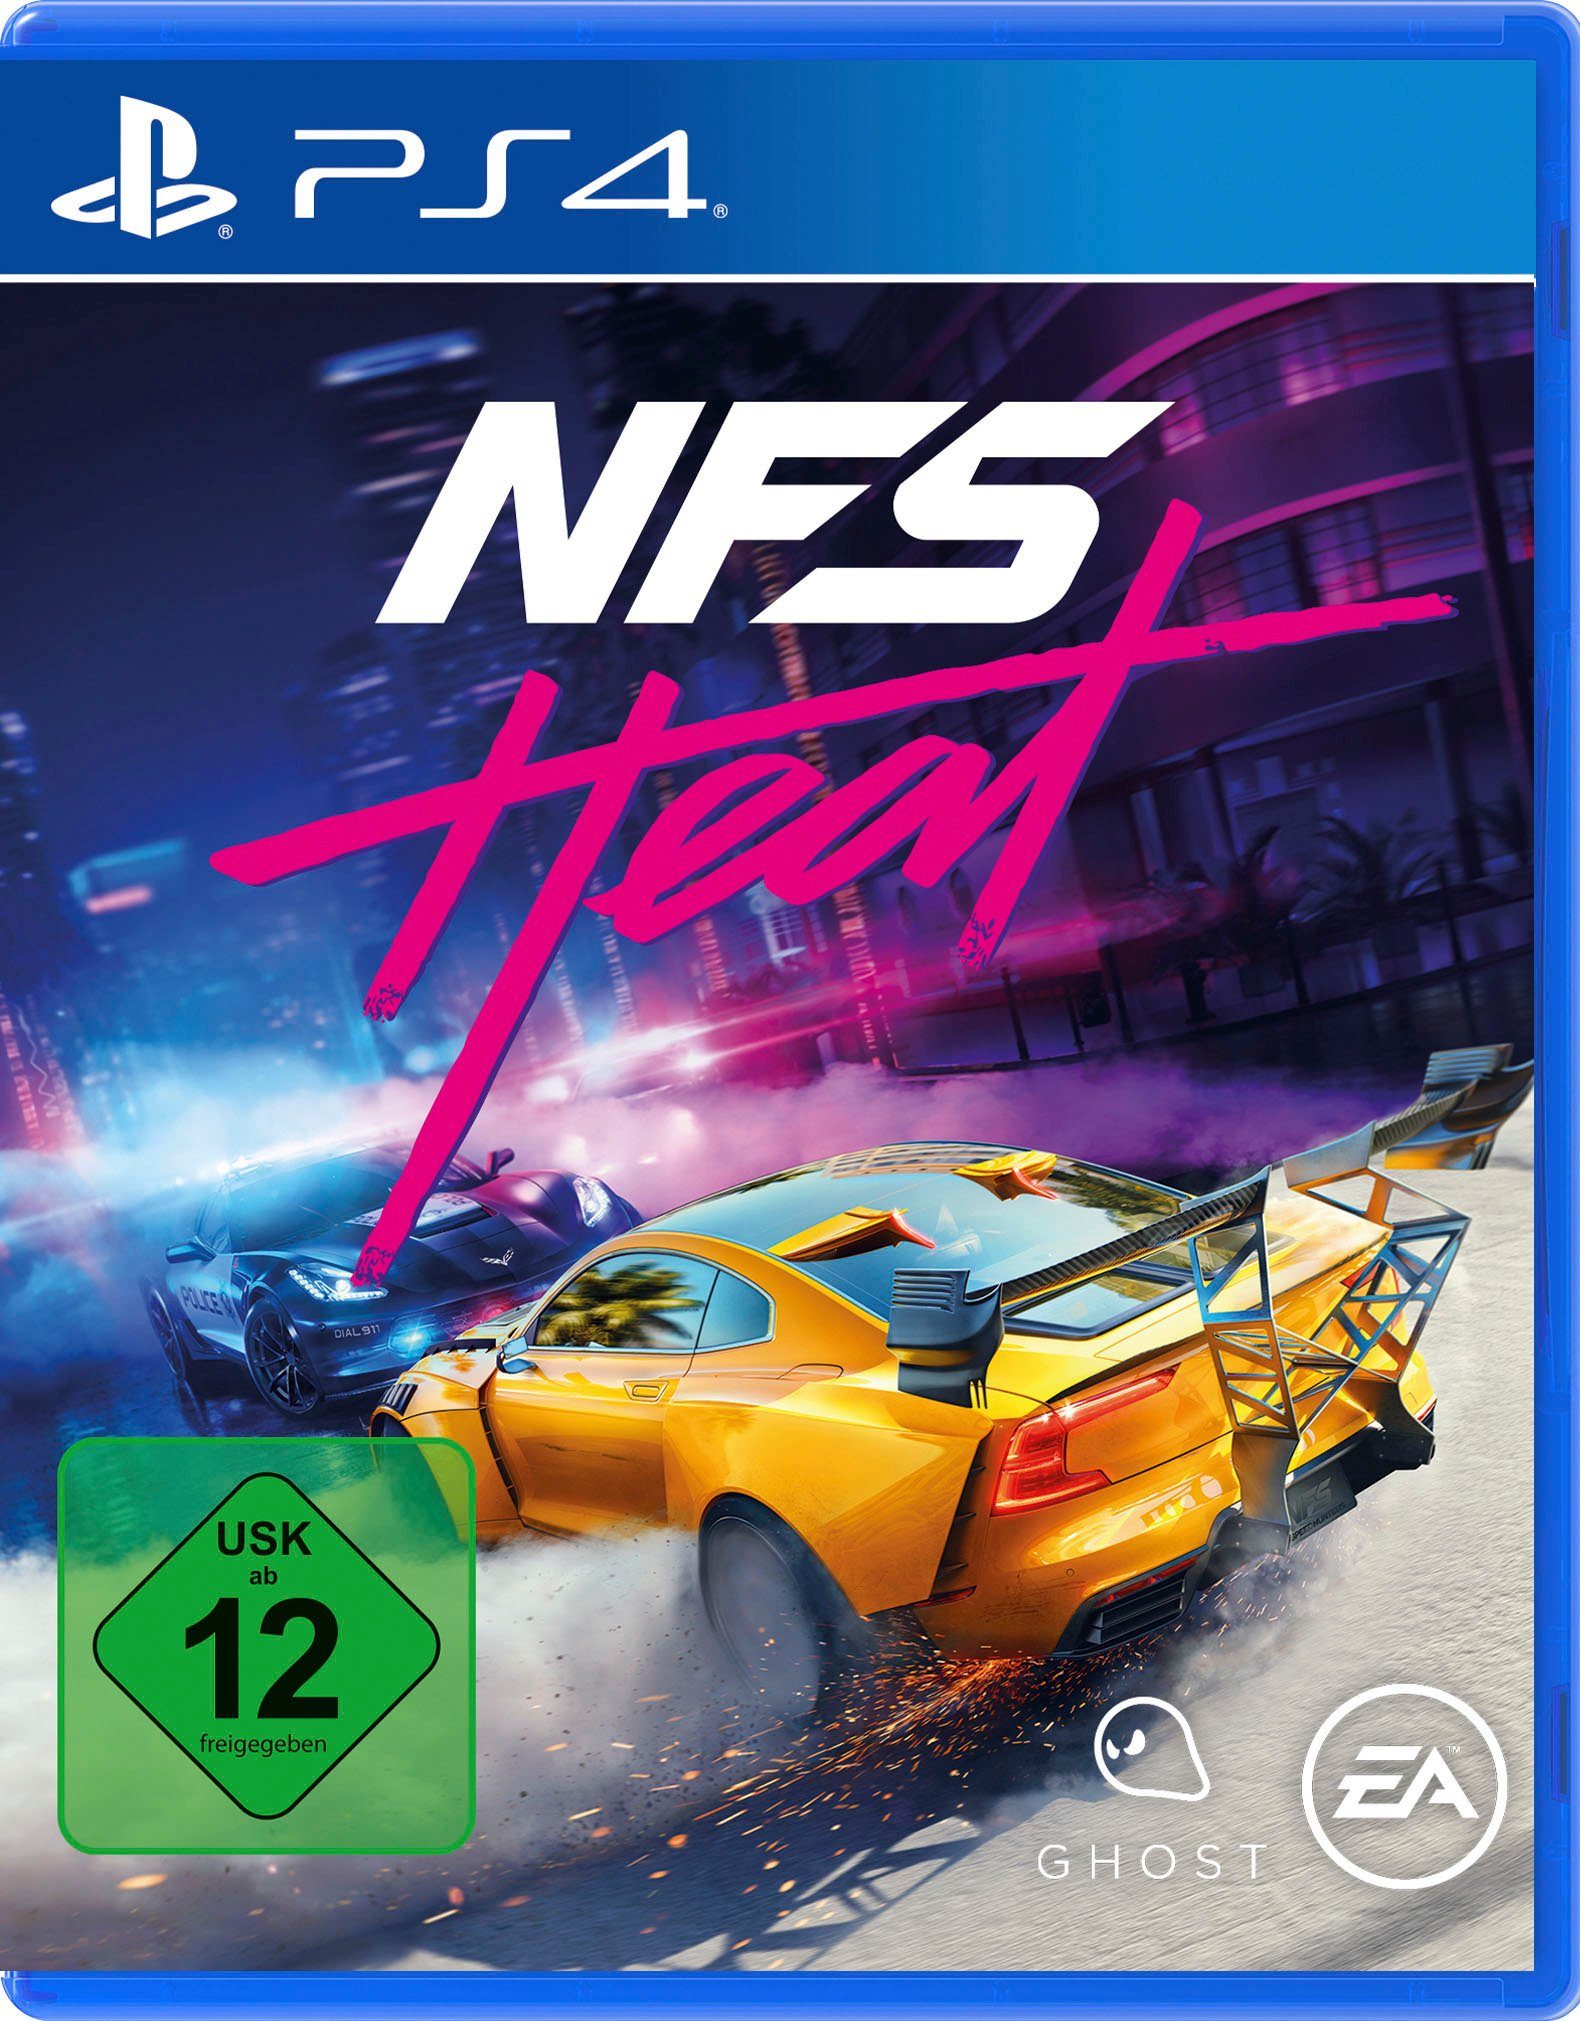 For Speed: Electronic Heat Need 4 PlayStation Arts